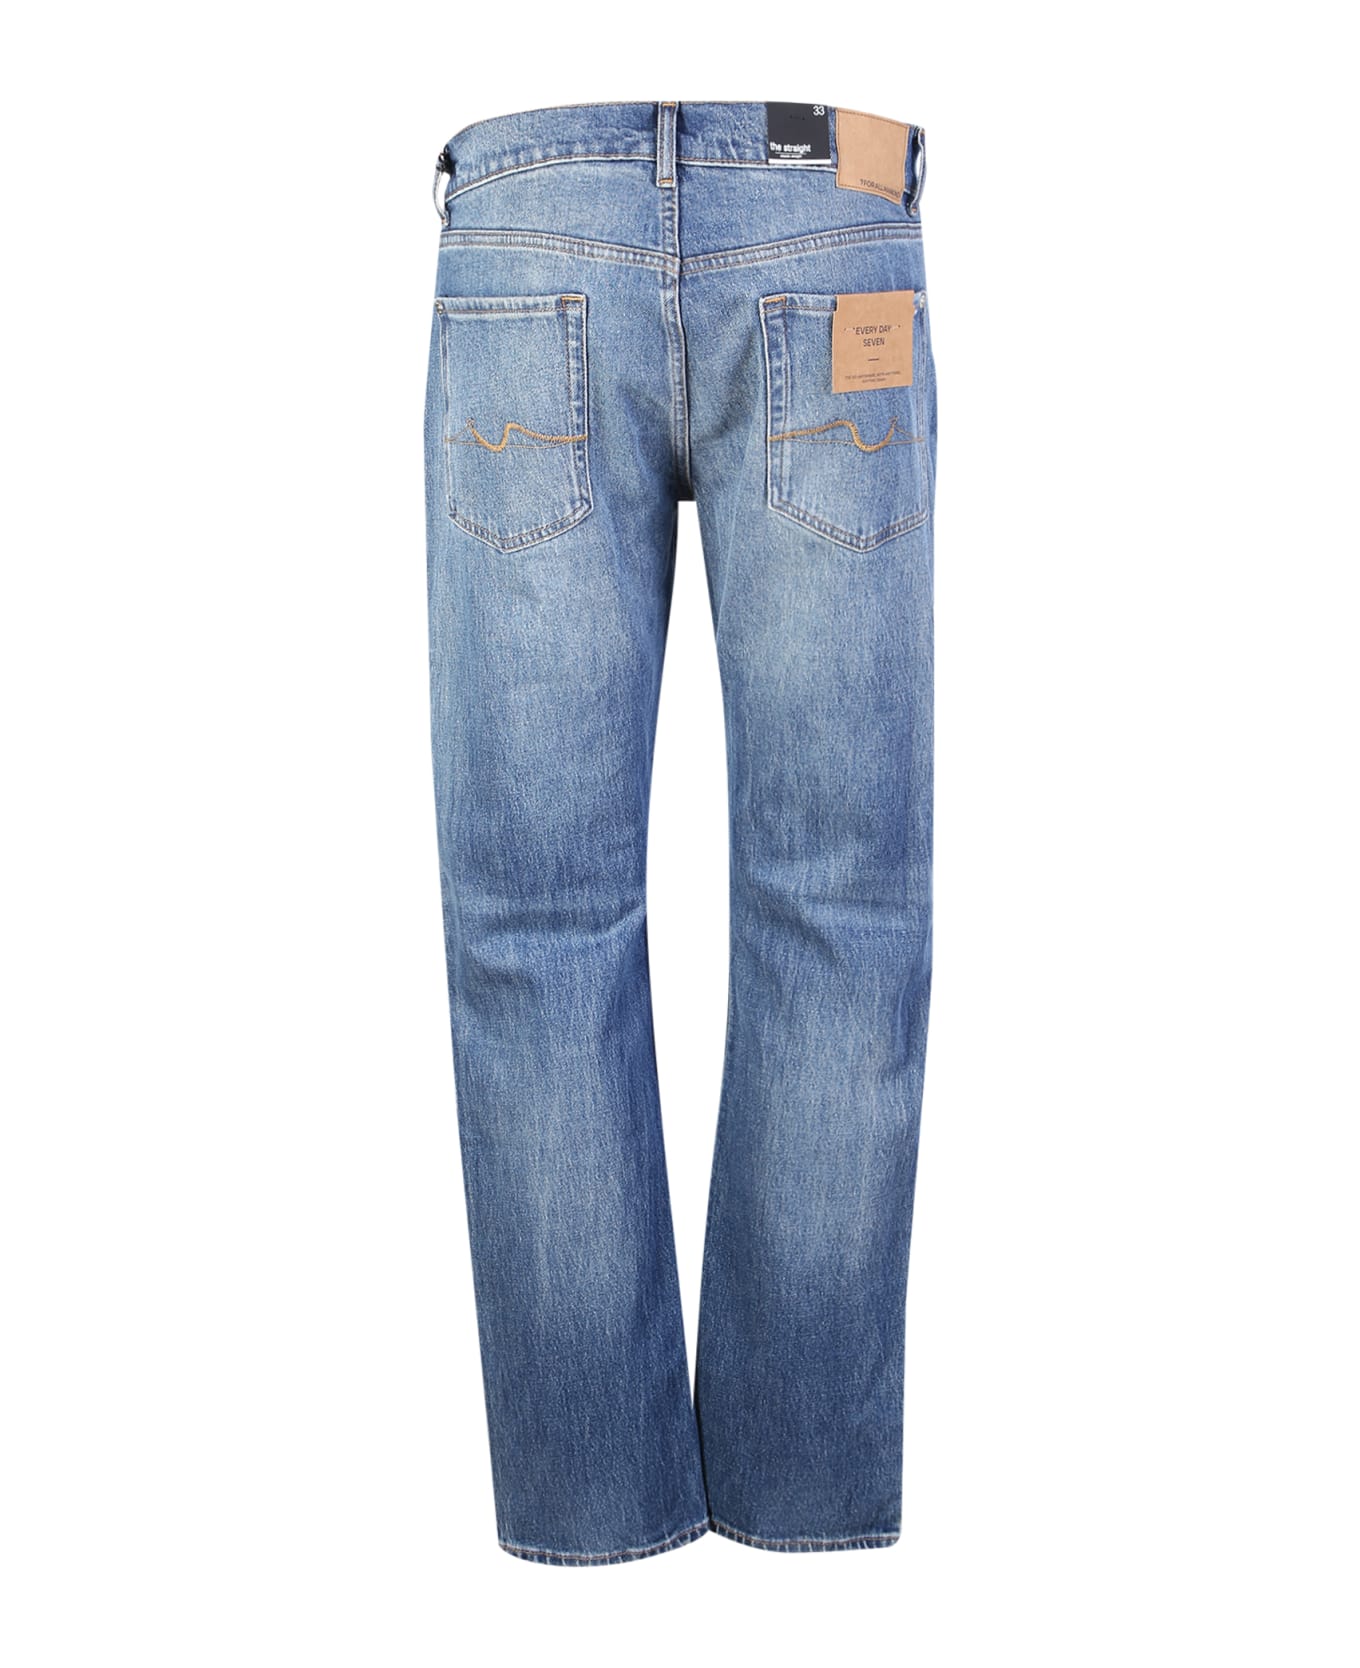 7 For All Mankind Straight Blue Jeans - Blue デニム